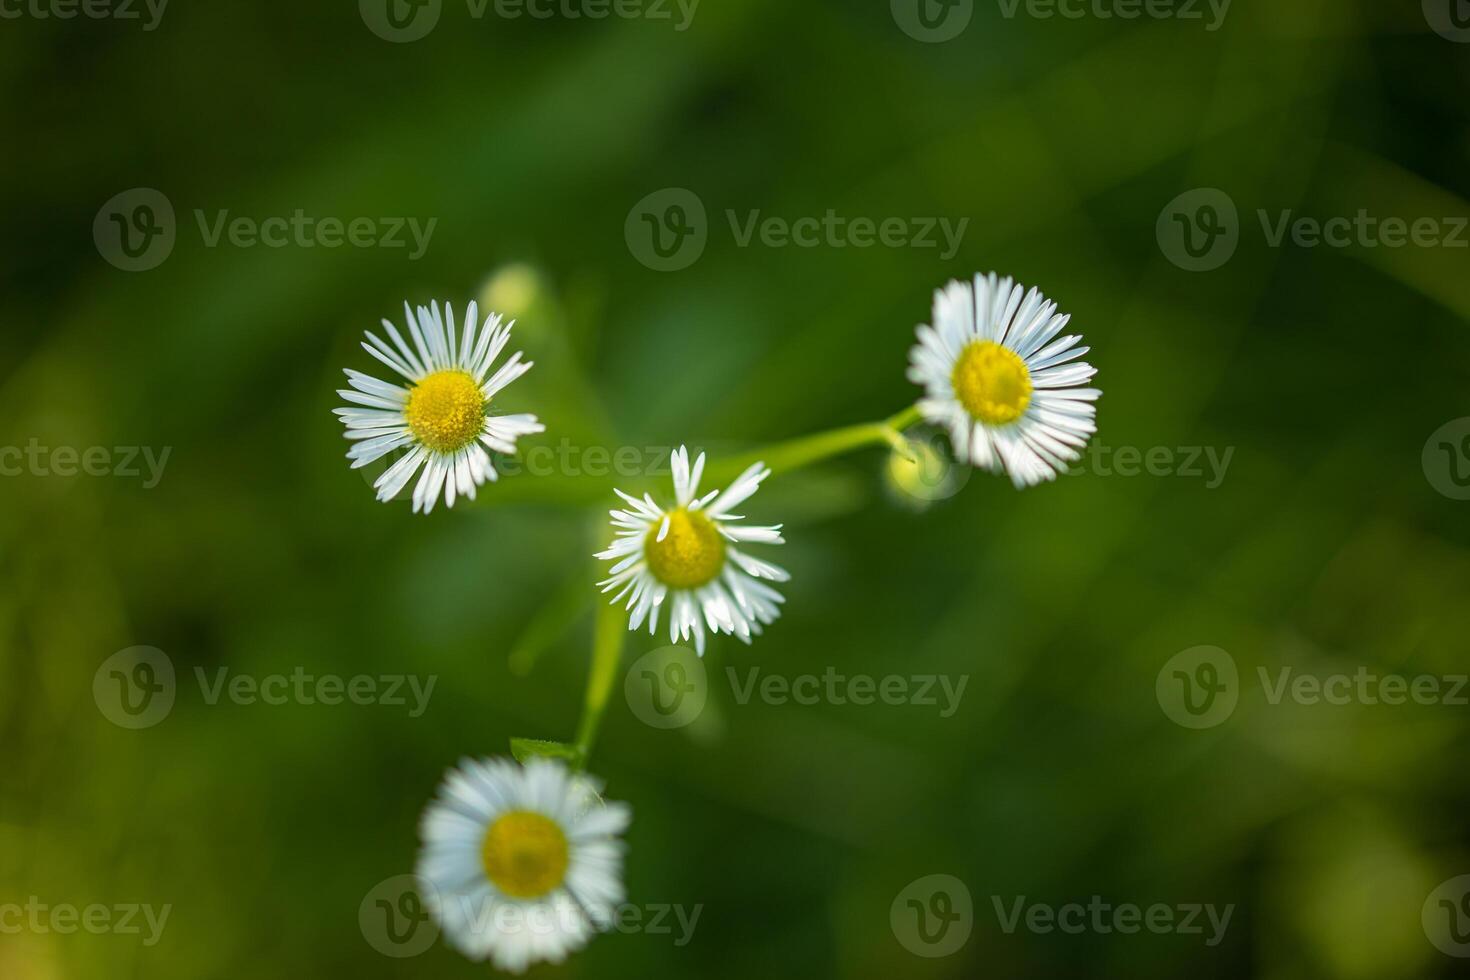 Closeup meadow sunset flowers blur and soft silhouette of grass flowers with sunlight. Relaxing nature meadow flowers. Peaceful blur of autumn spring nature landscape. Wild meadow daisy floral photo